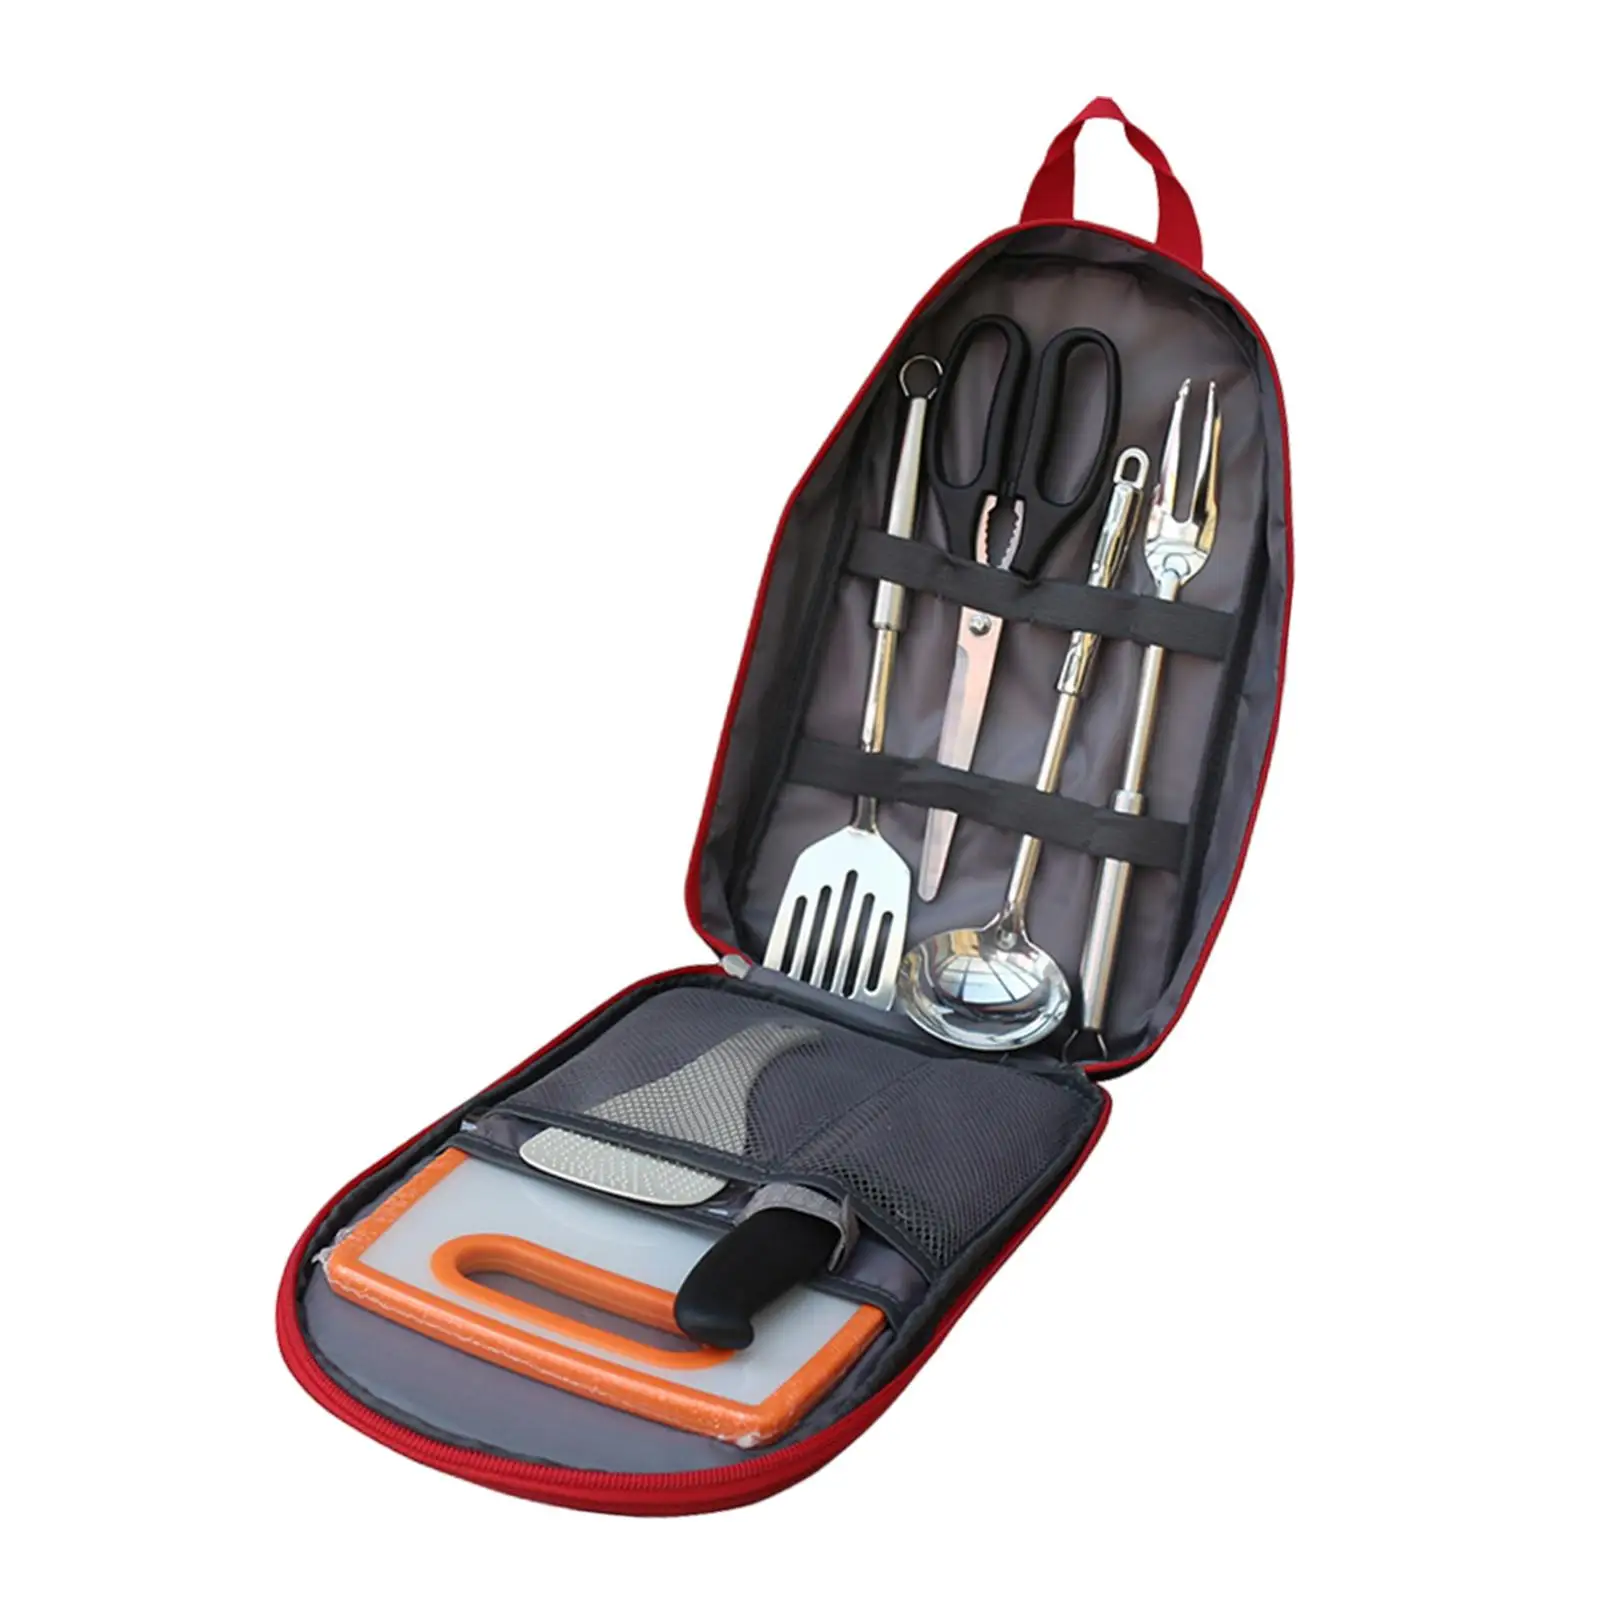 7 Pieces Camping Cooking Utensils Set with Carrying Bag Portable Gear Camp Kitchen Equipment for RV Picnic BBQ Grilling Gadgets